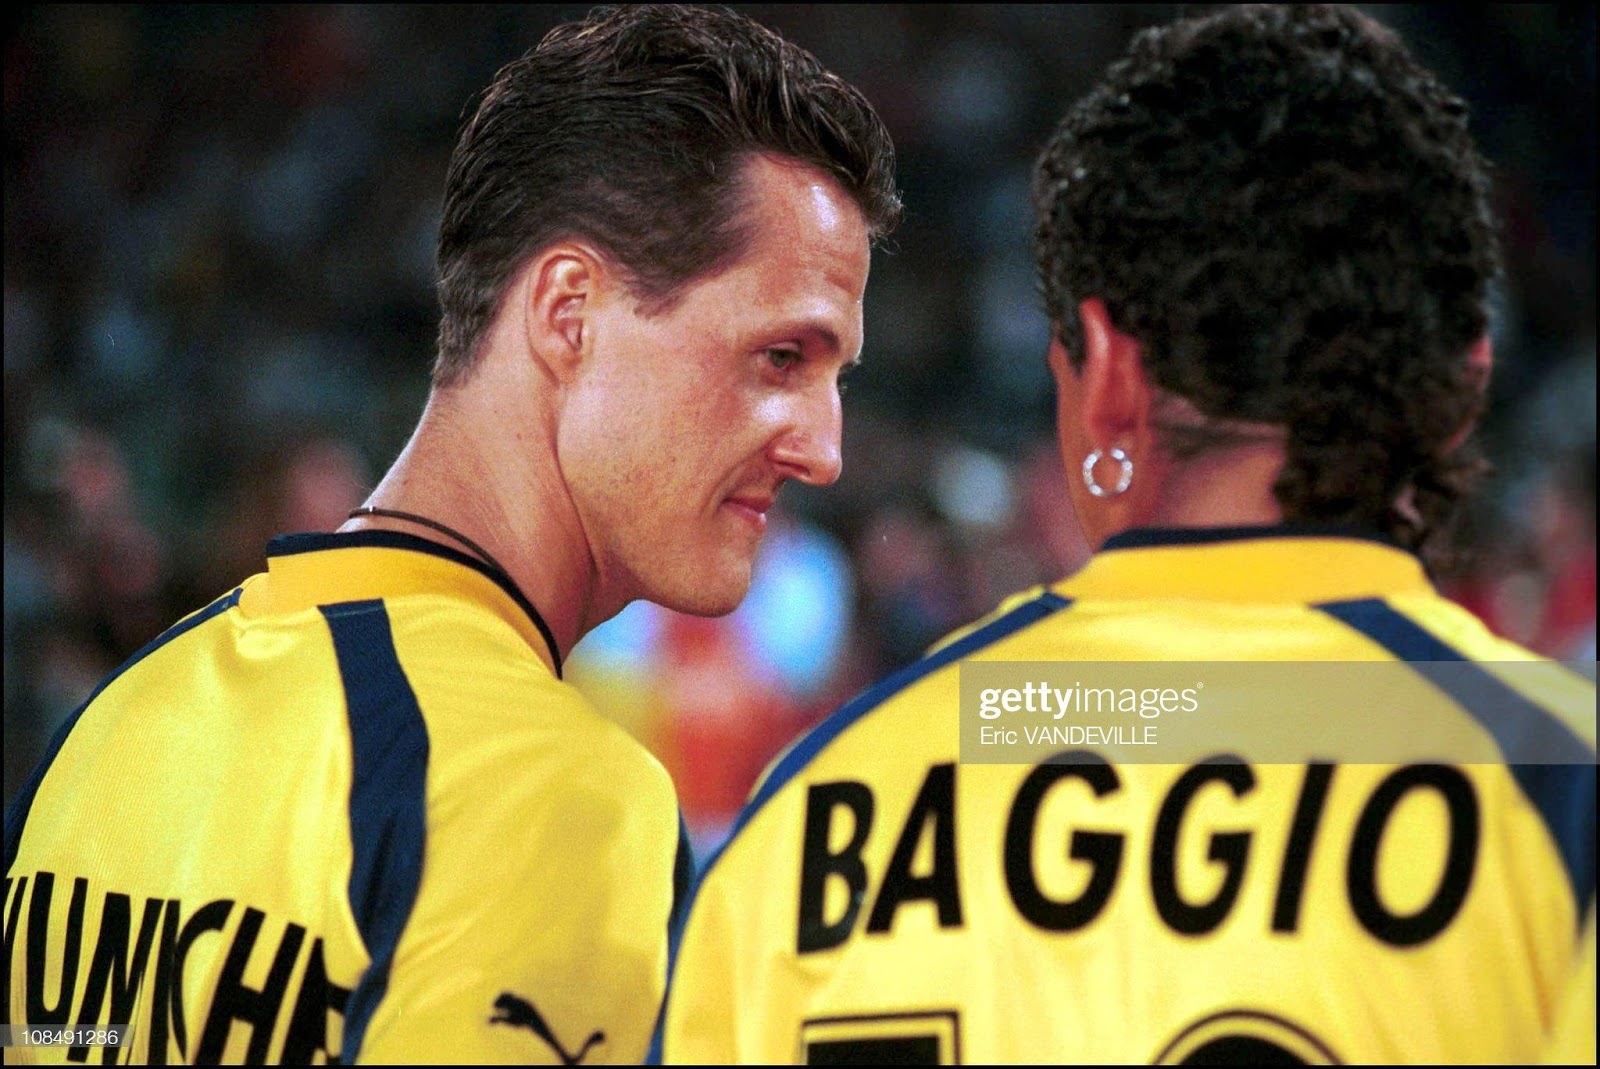 Michael Schumacher and Roberto Baggio in Rome, Italy, on May 25th, 2000. 